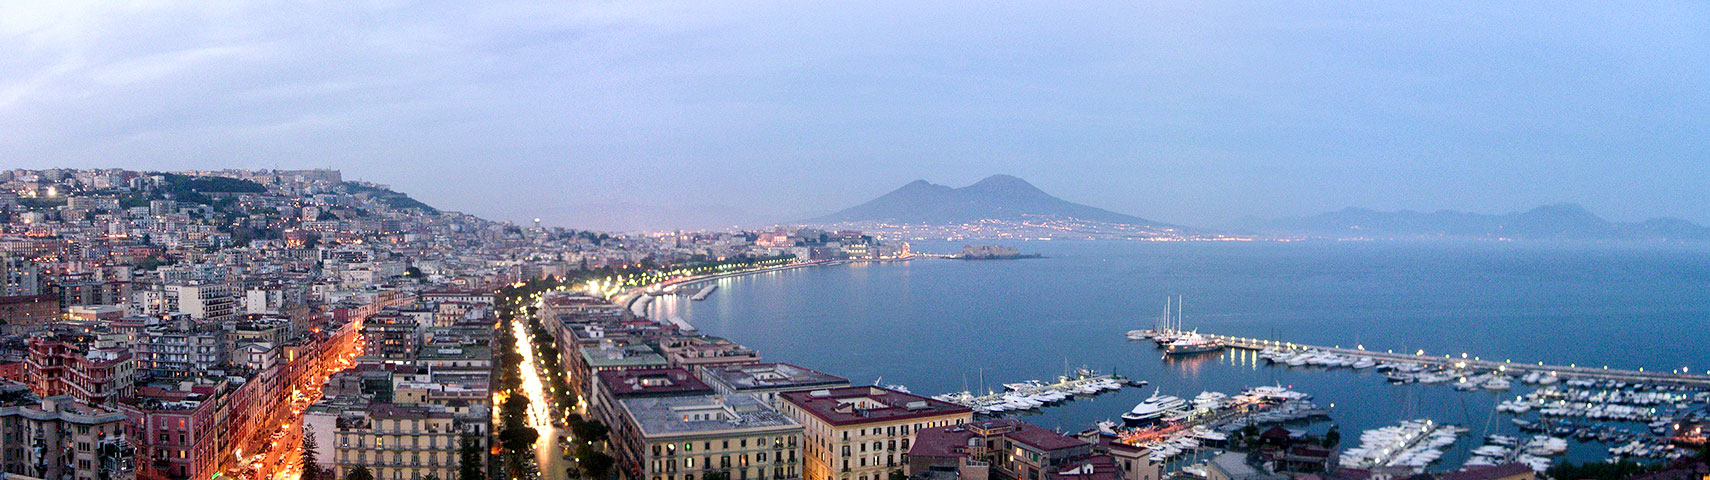 Bay of Naples with Mount Vesuvius in background, Campania, Italy